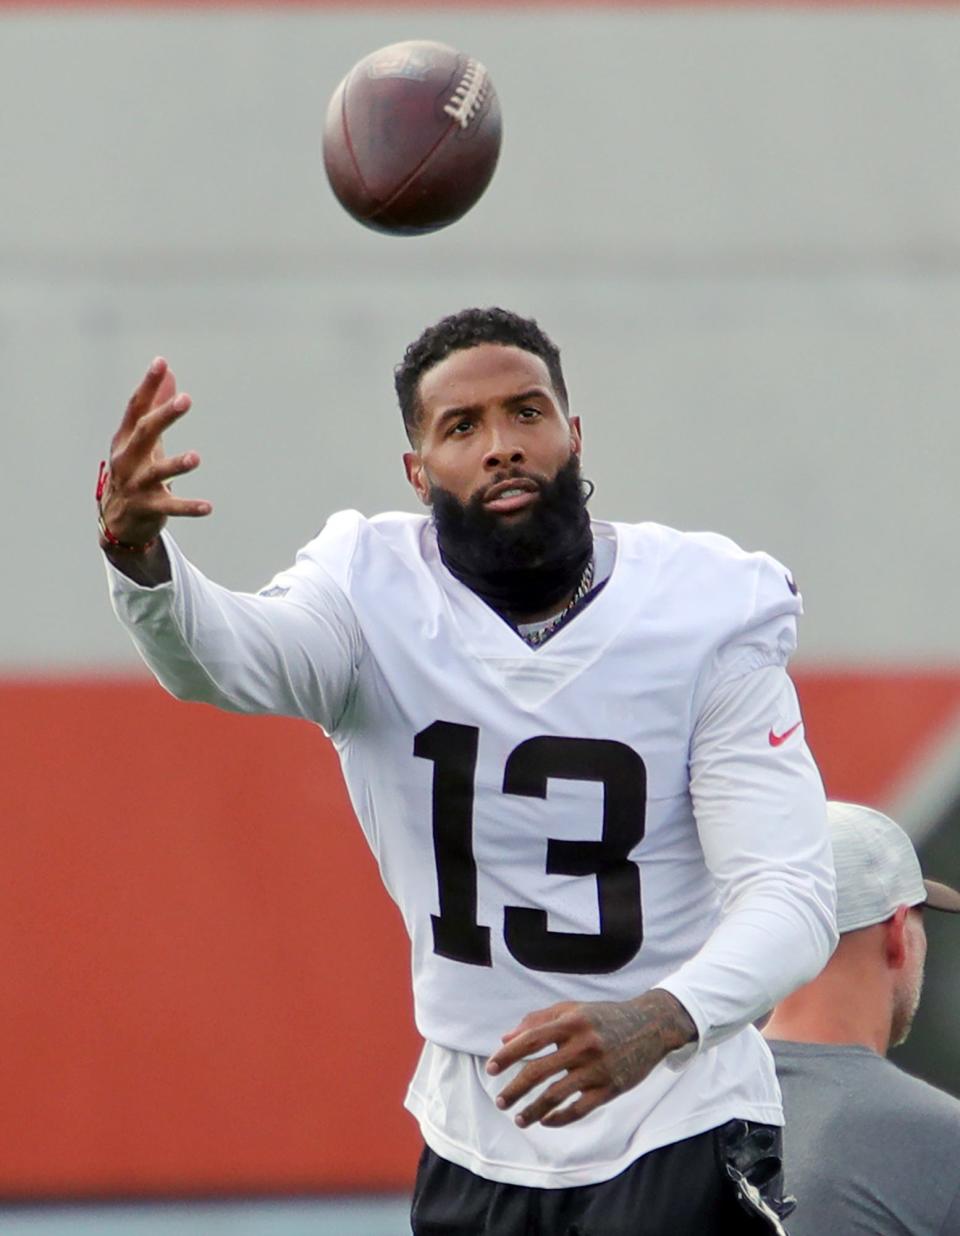 In seven games last season, Odell Beckham Jr. caught 23 passes for 319 yards and three touchdowns and rushed three times for 74 yards and a score.